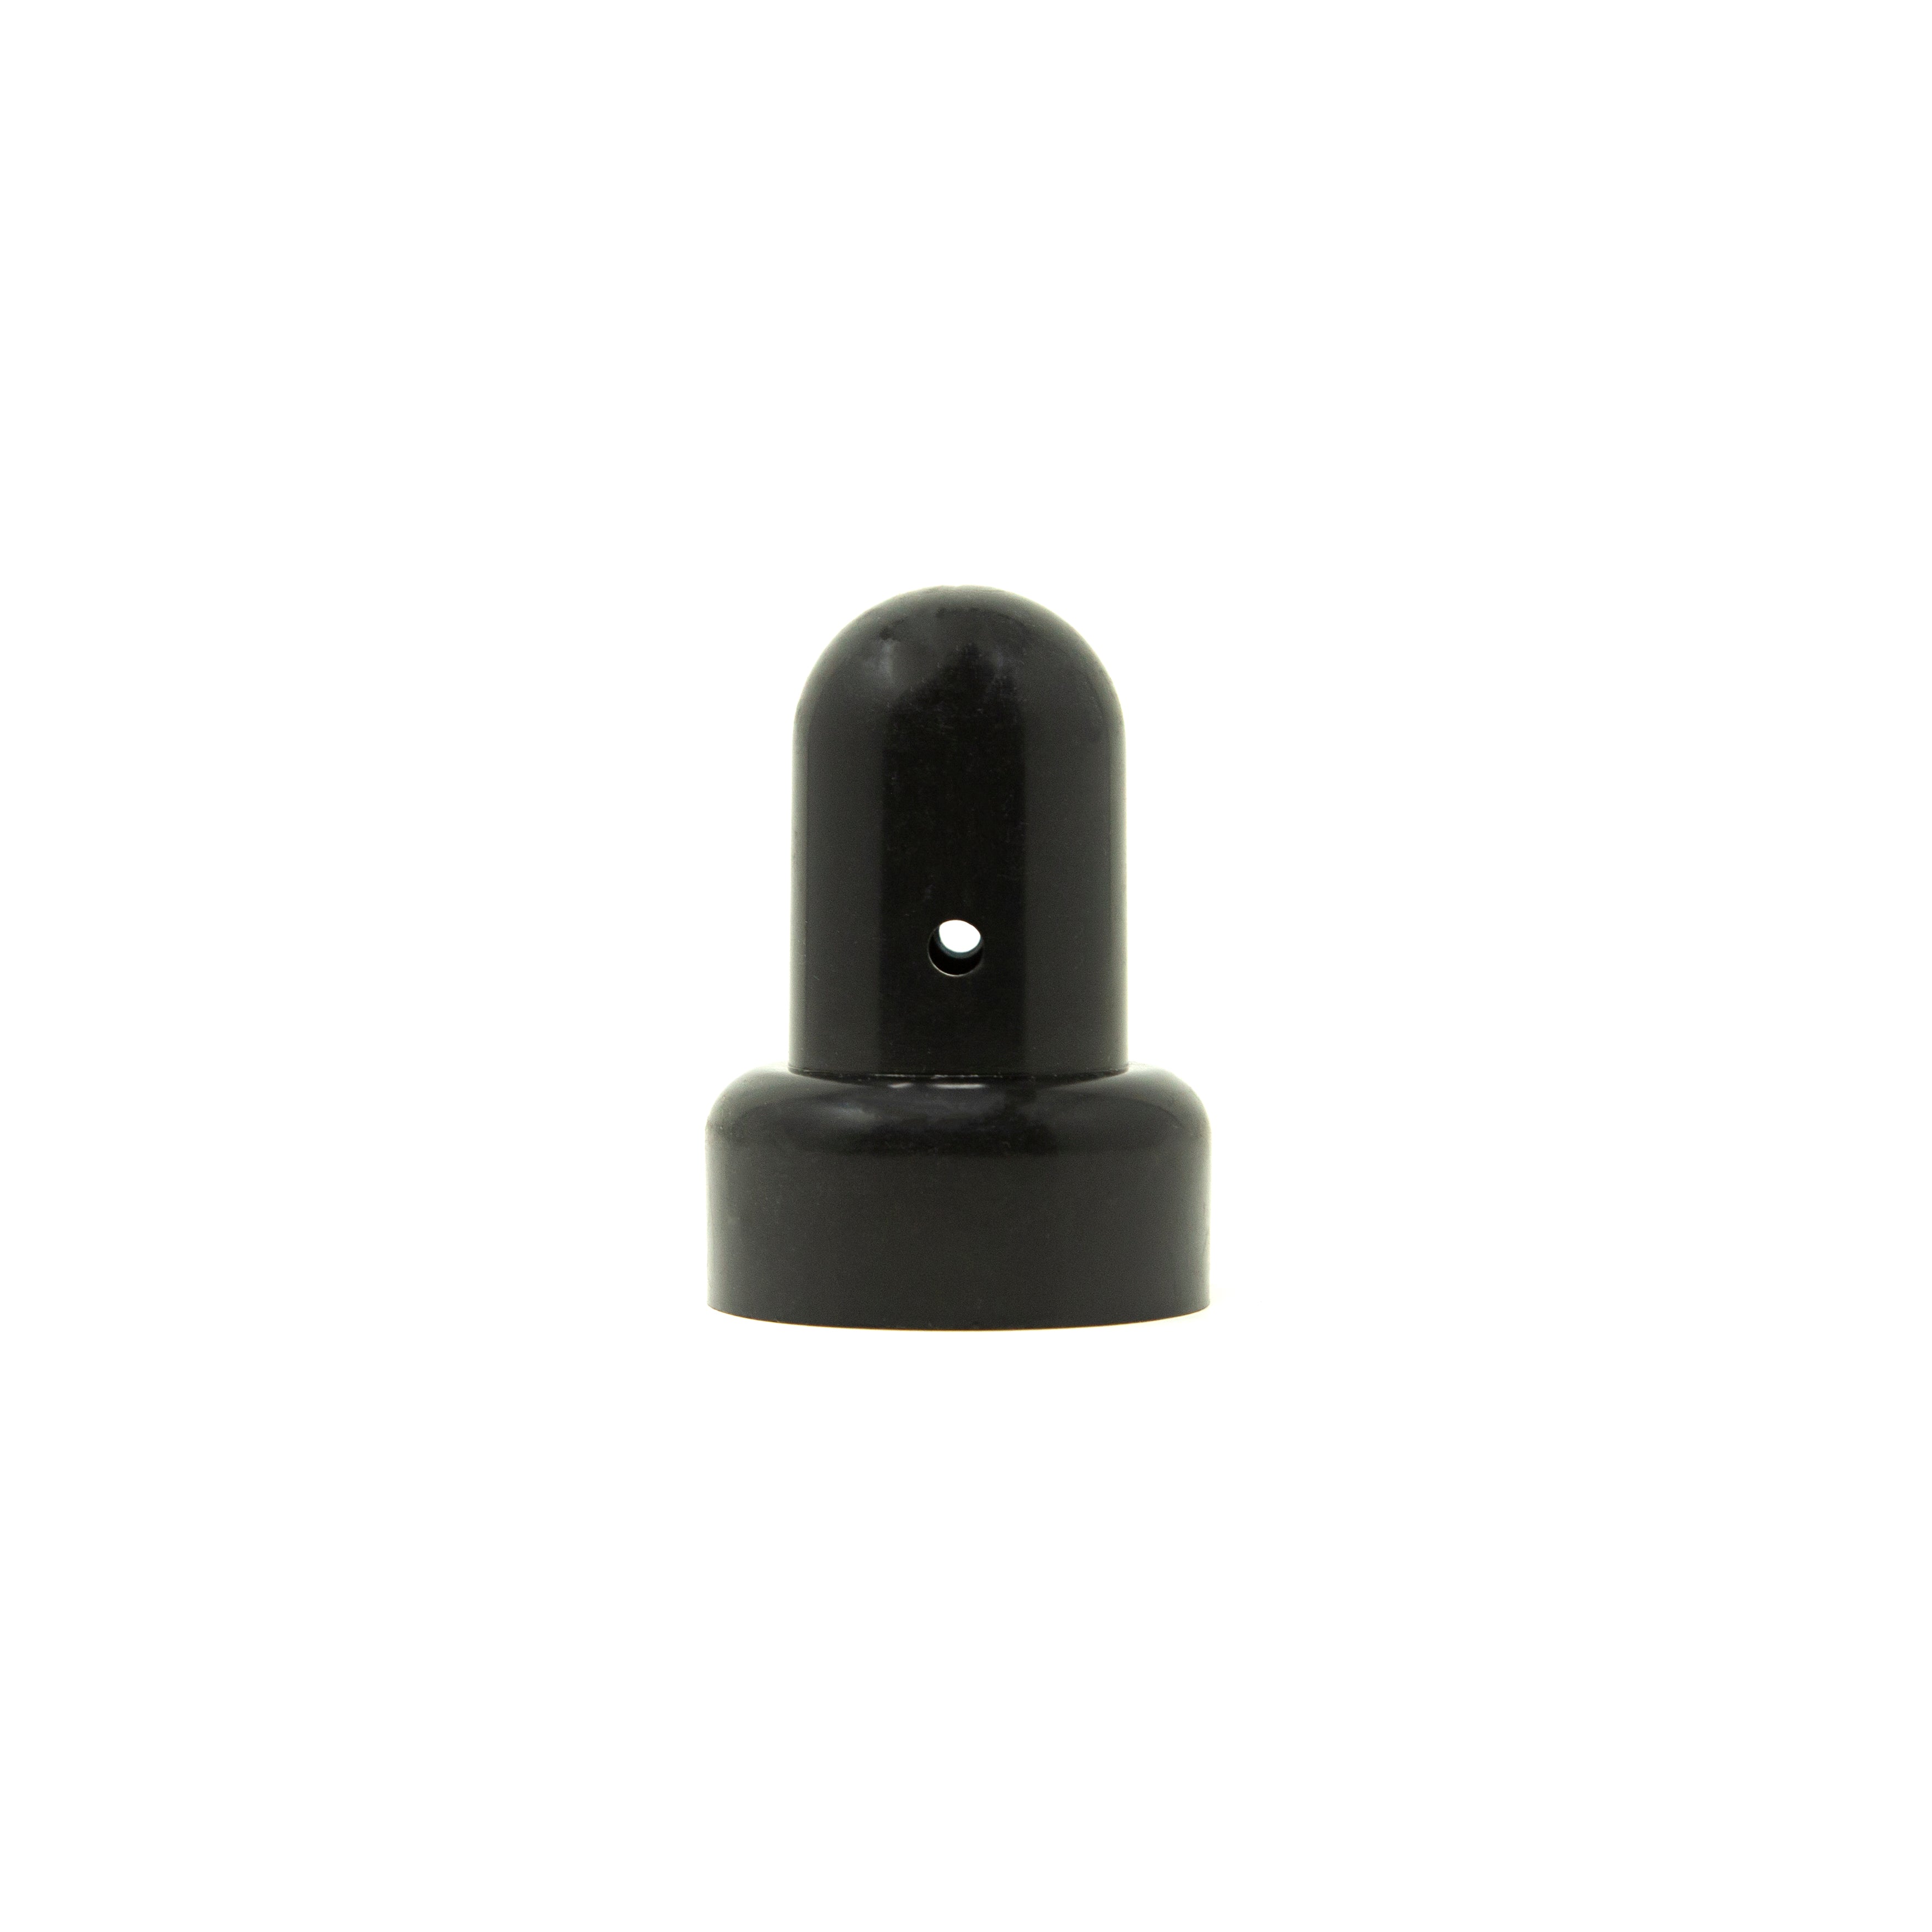 Black pole cap with a round hole on one side. 